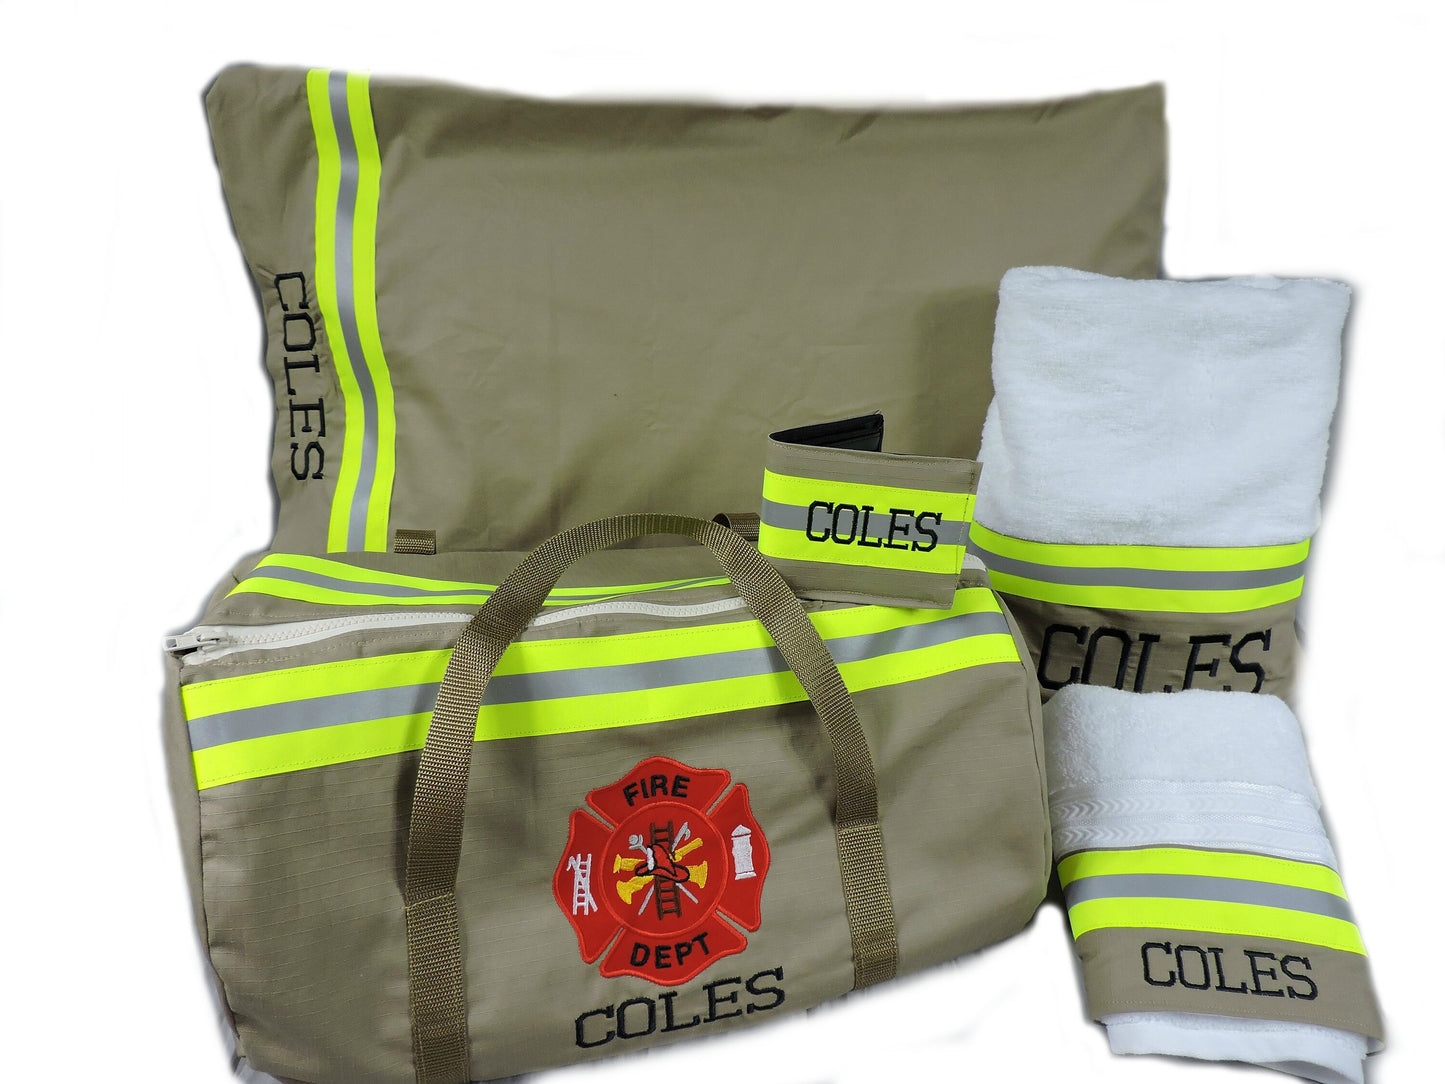 tan fabric Firefighter Gift set with firefighter duffle bag, bath and hand towel, wallet and pillowcase